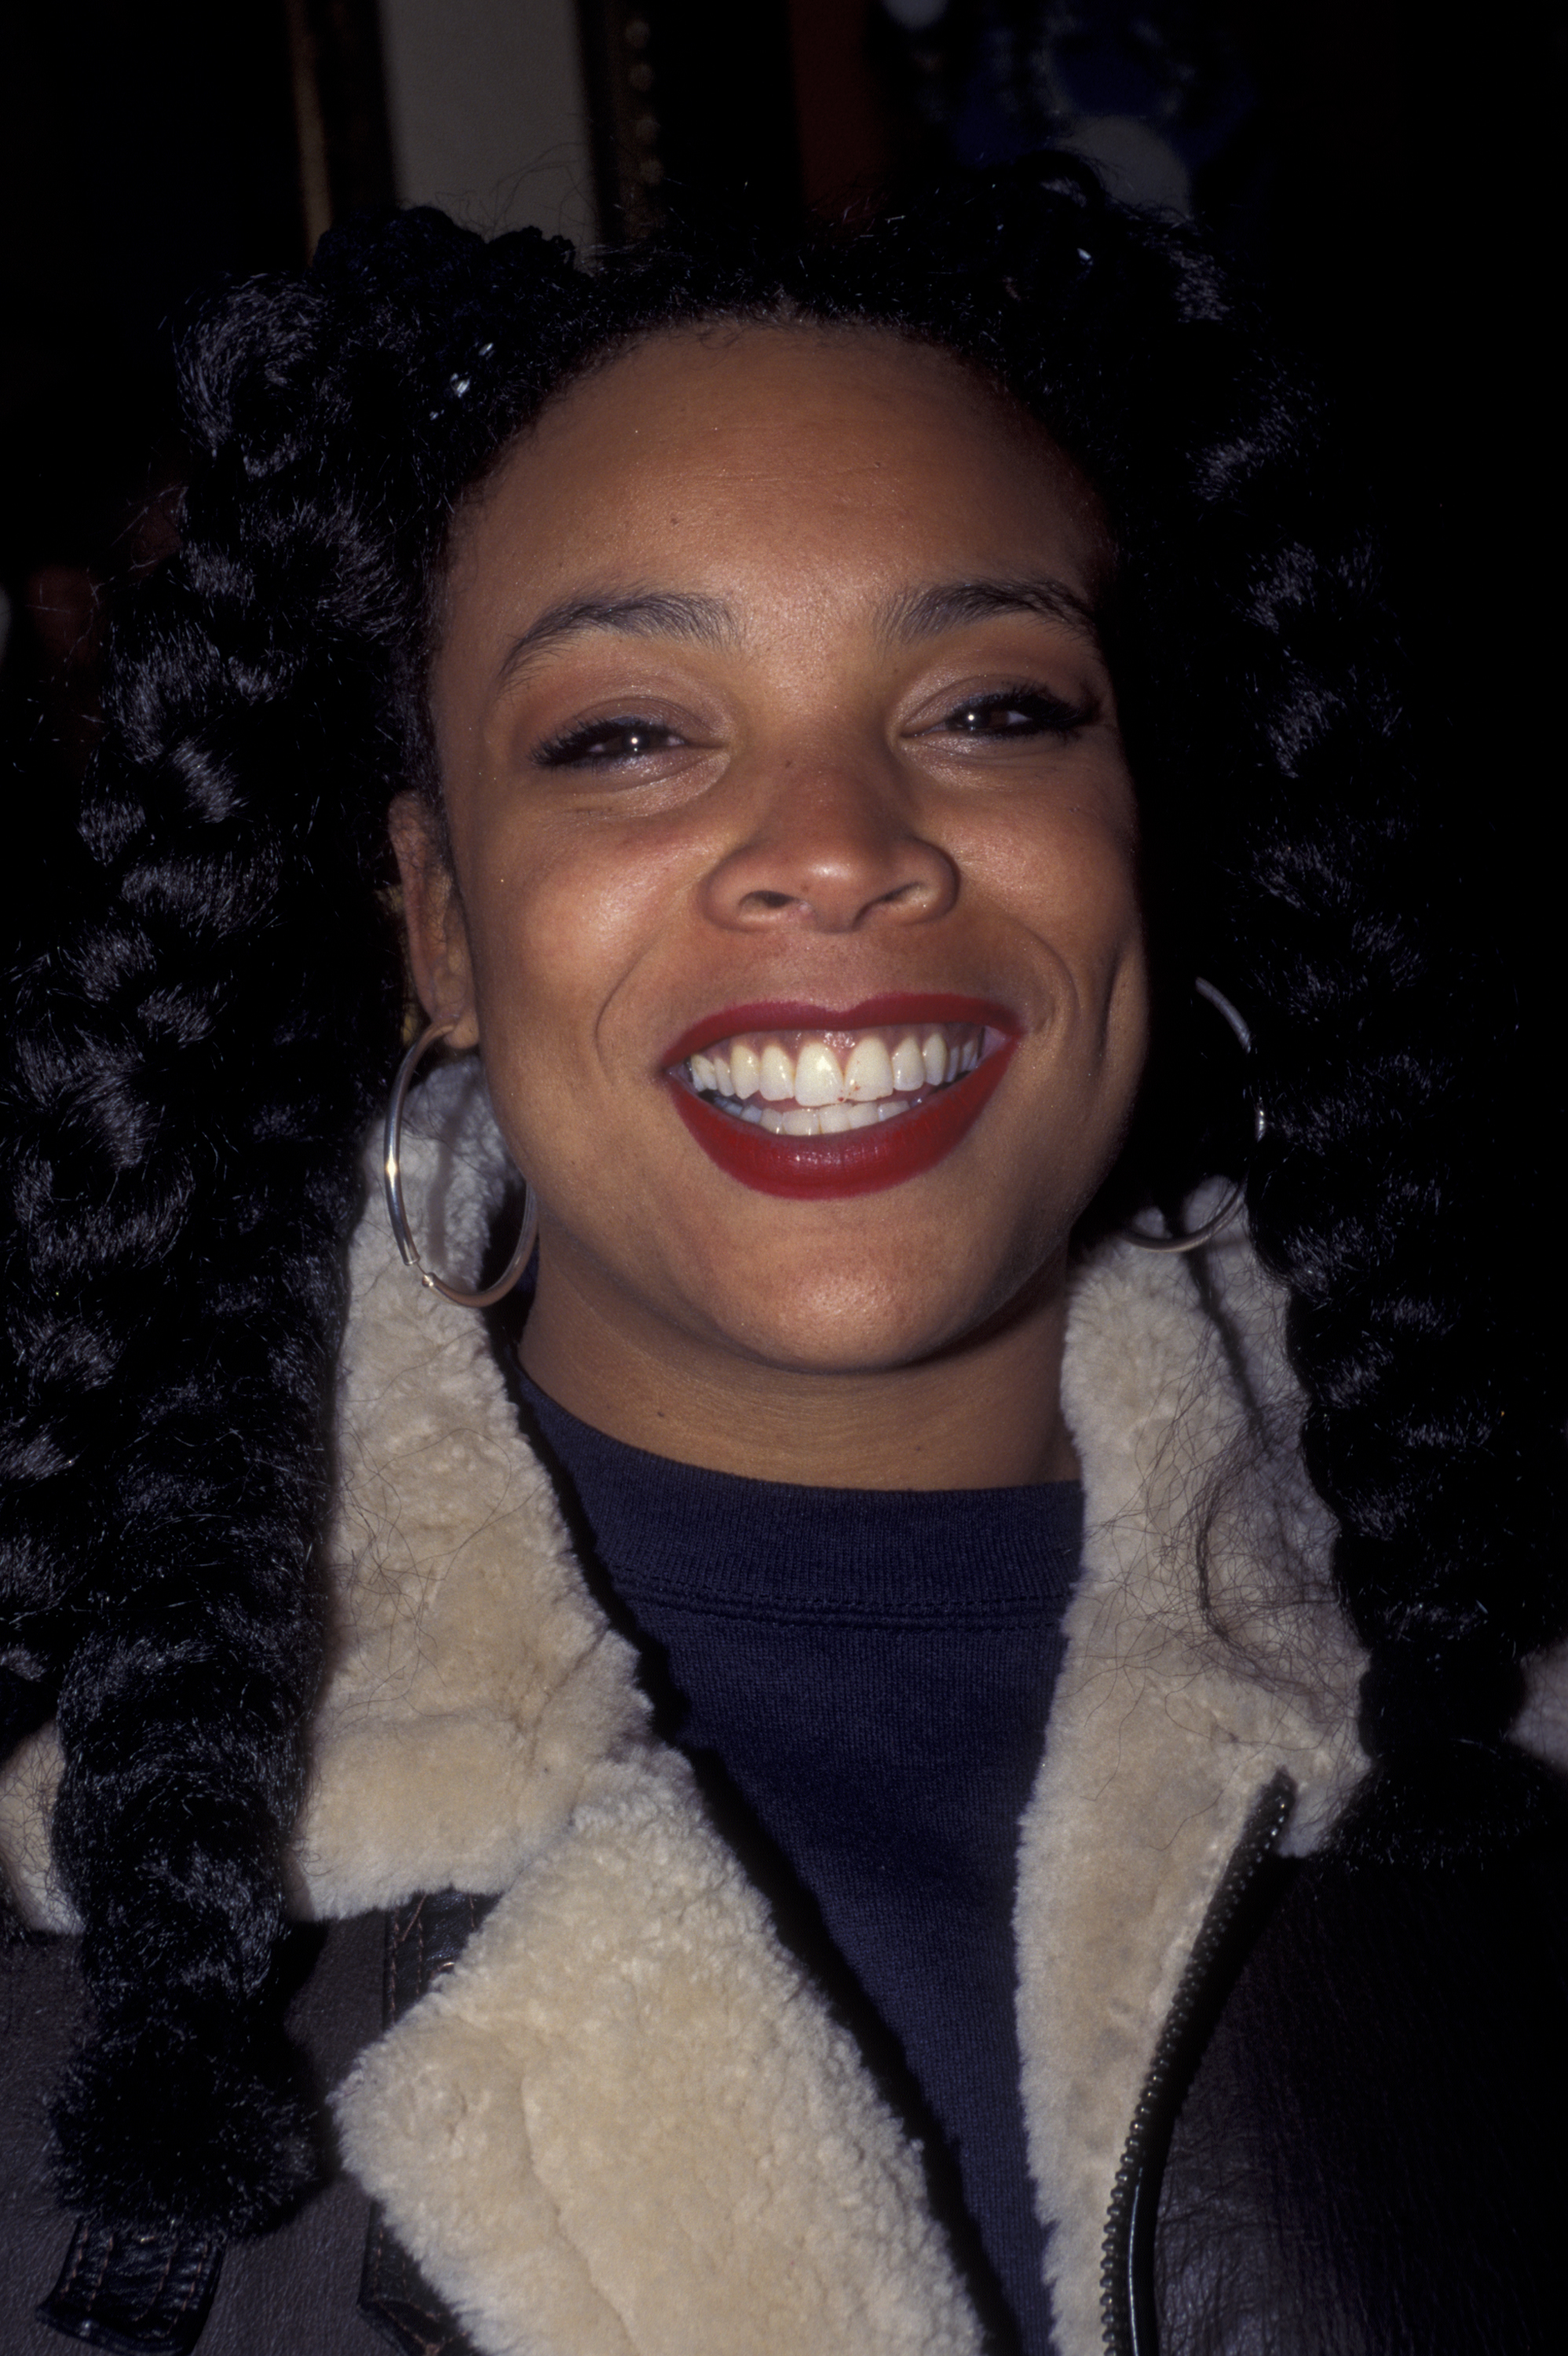 Wendy Williams attends "NY Undercover" Wrap Party at the Hard Rock Cafe on January 9, 1995 in New York City. | Source: Getty Images